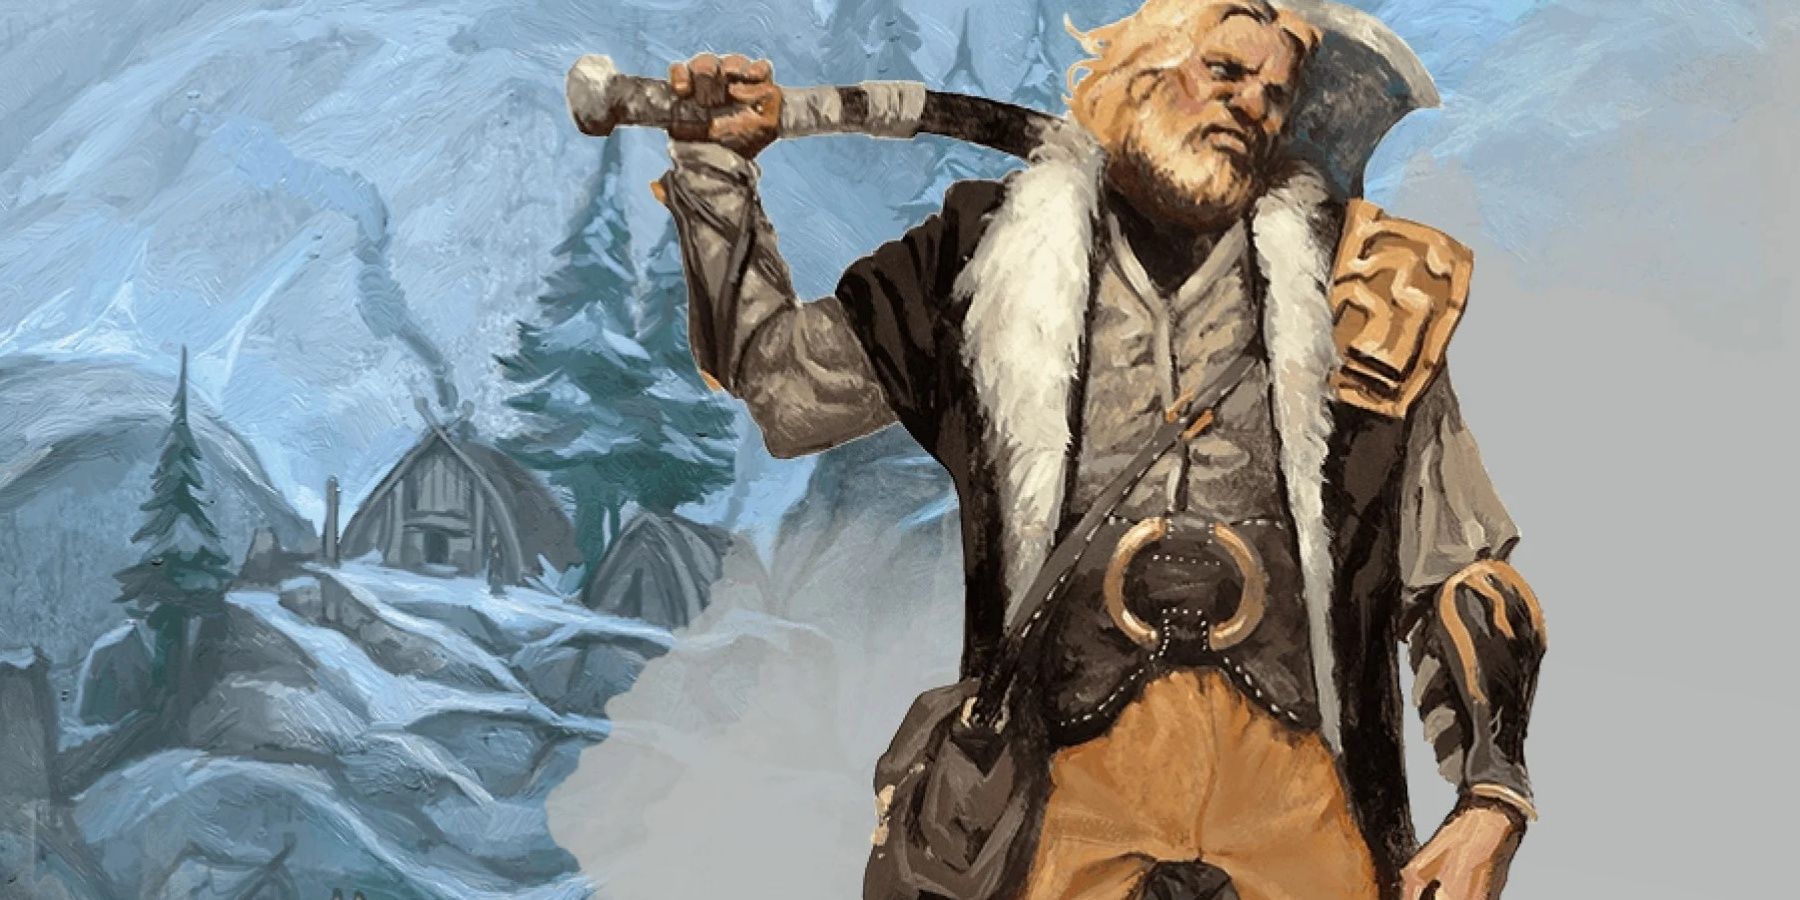 Dungeons And Dragons: A Human Barbarian Male in the mountains with a snow village in the background